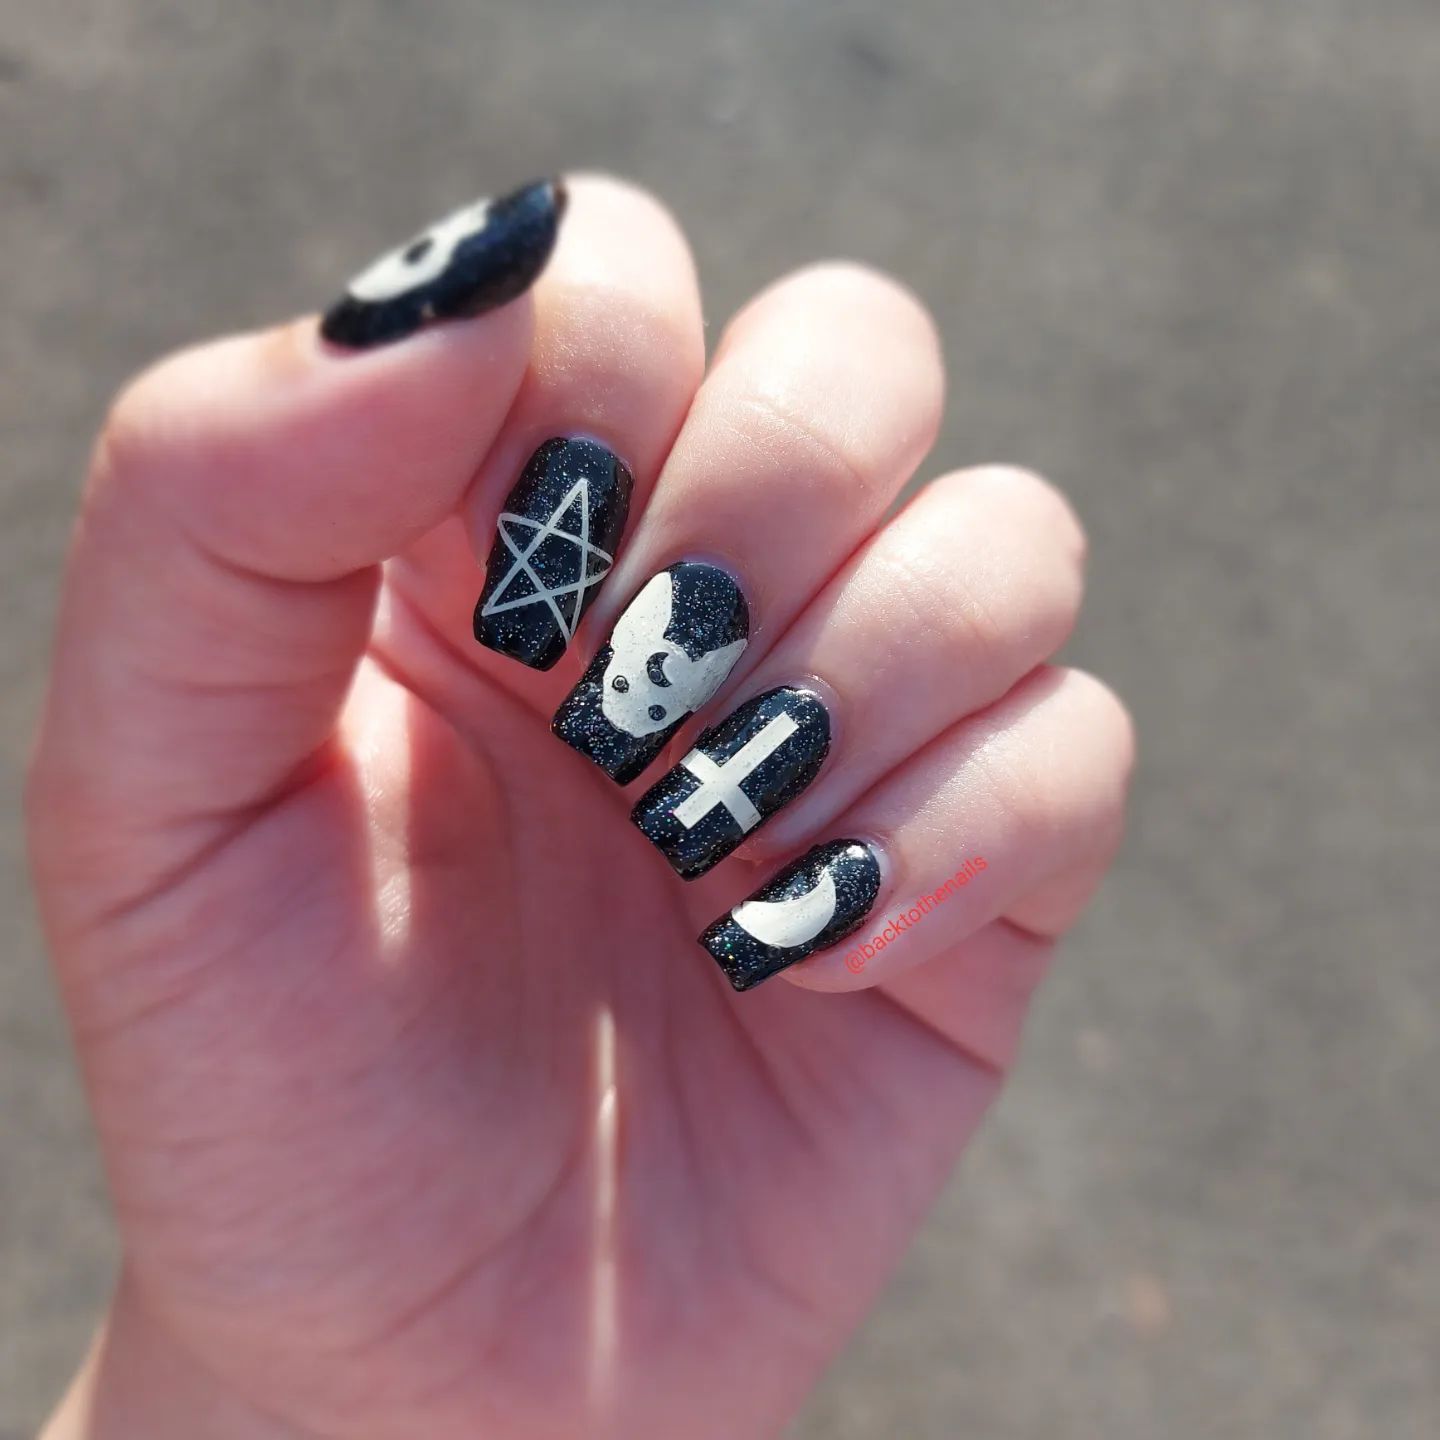 These nail stickers may look super dark but when you consider that you use them on Halloween, it makes sense.